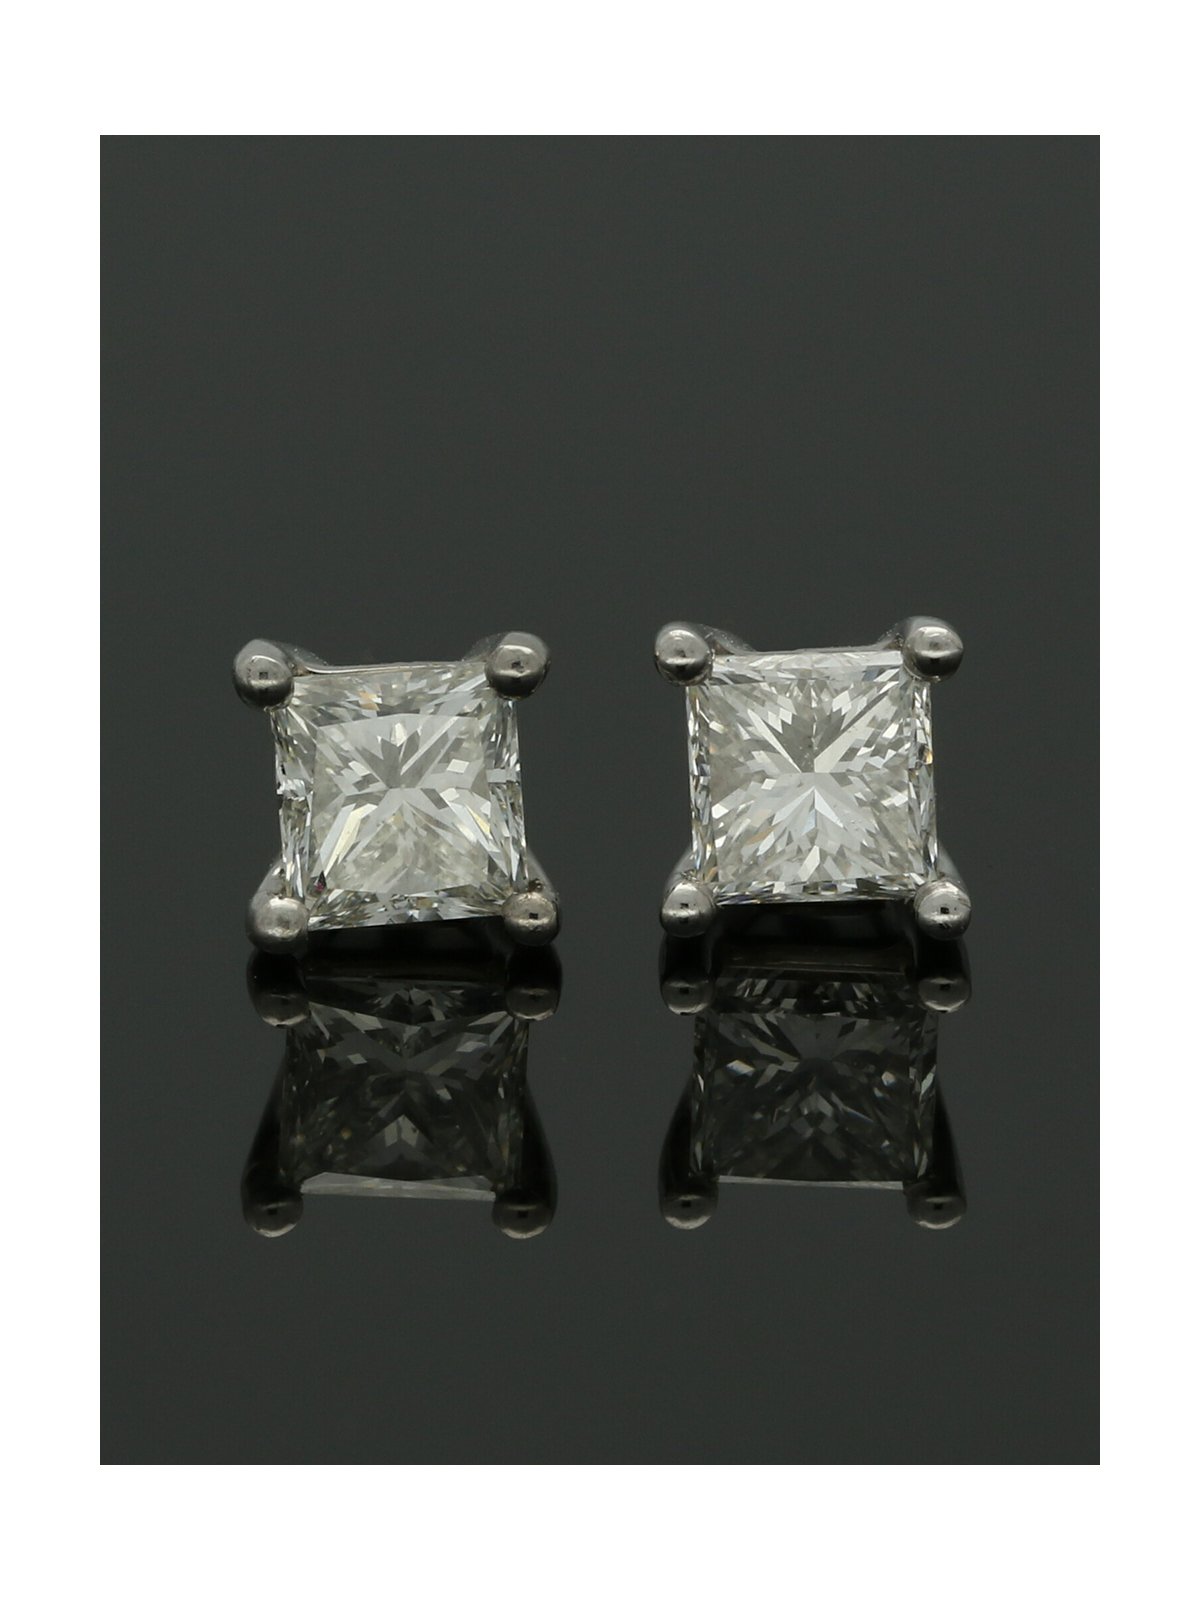 Diamond Solitaire Stud Earrings "The Grace Collection" 1.00ct Princess Cut in 18ct White Gold